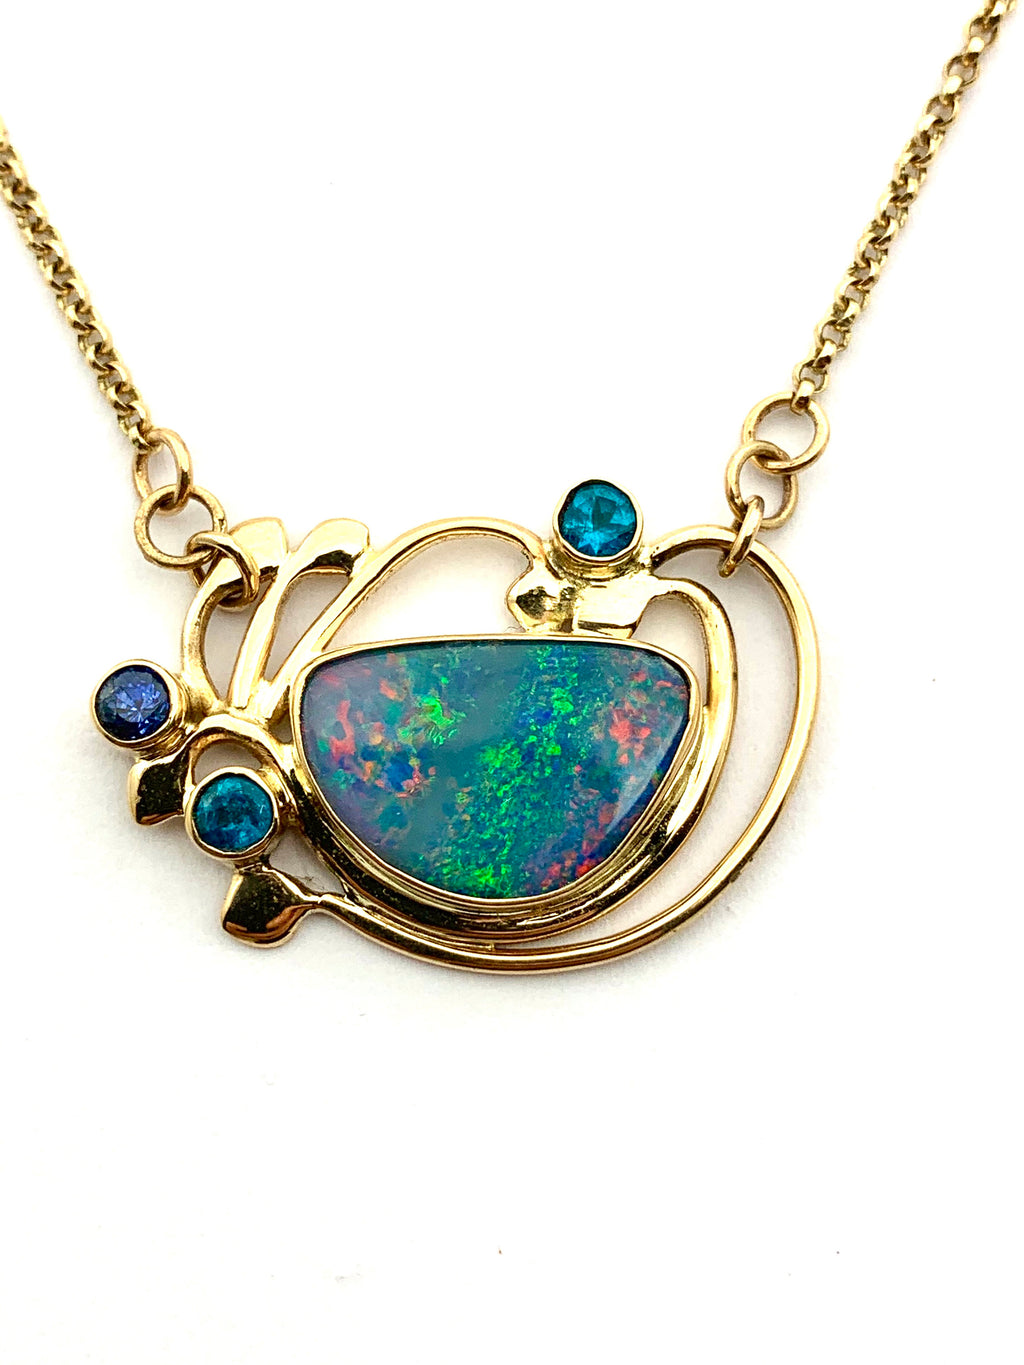 Australian Opal Necklace in 14k gold, Gold Solid Opal necklace with 14k chain, One of a kind Opal Necklace